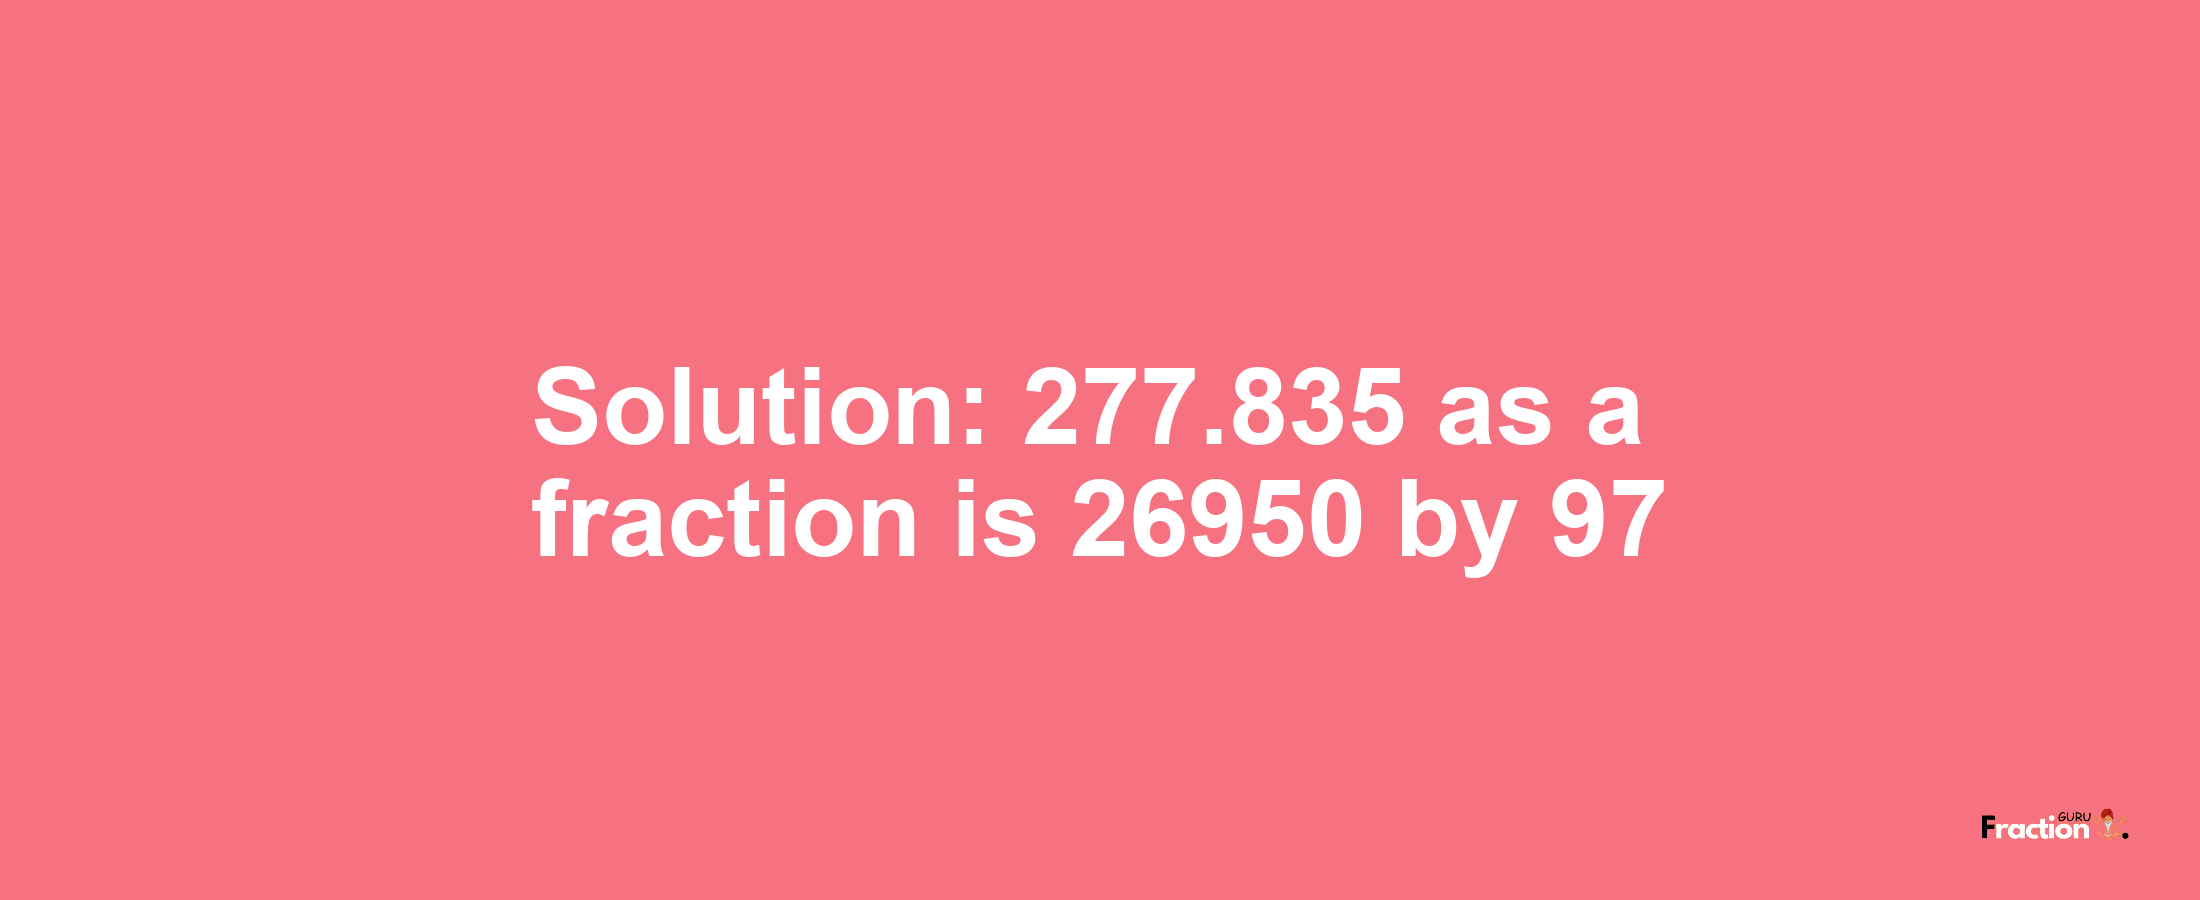 Solution:277.835 as a fraction is 26950/97